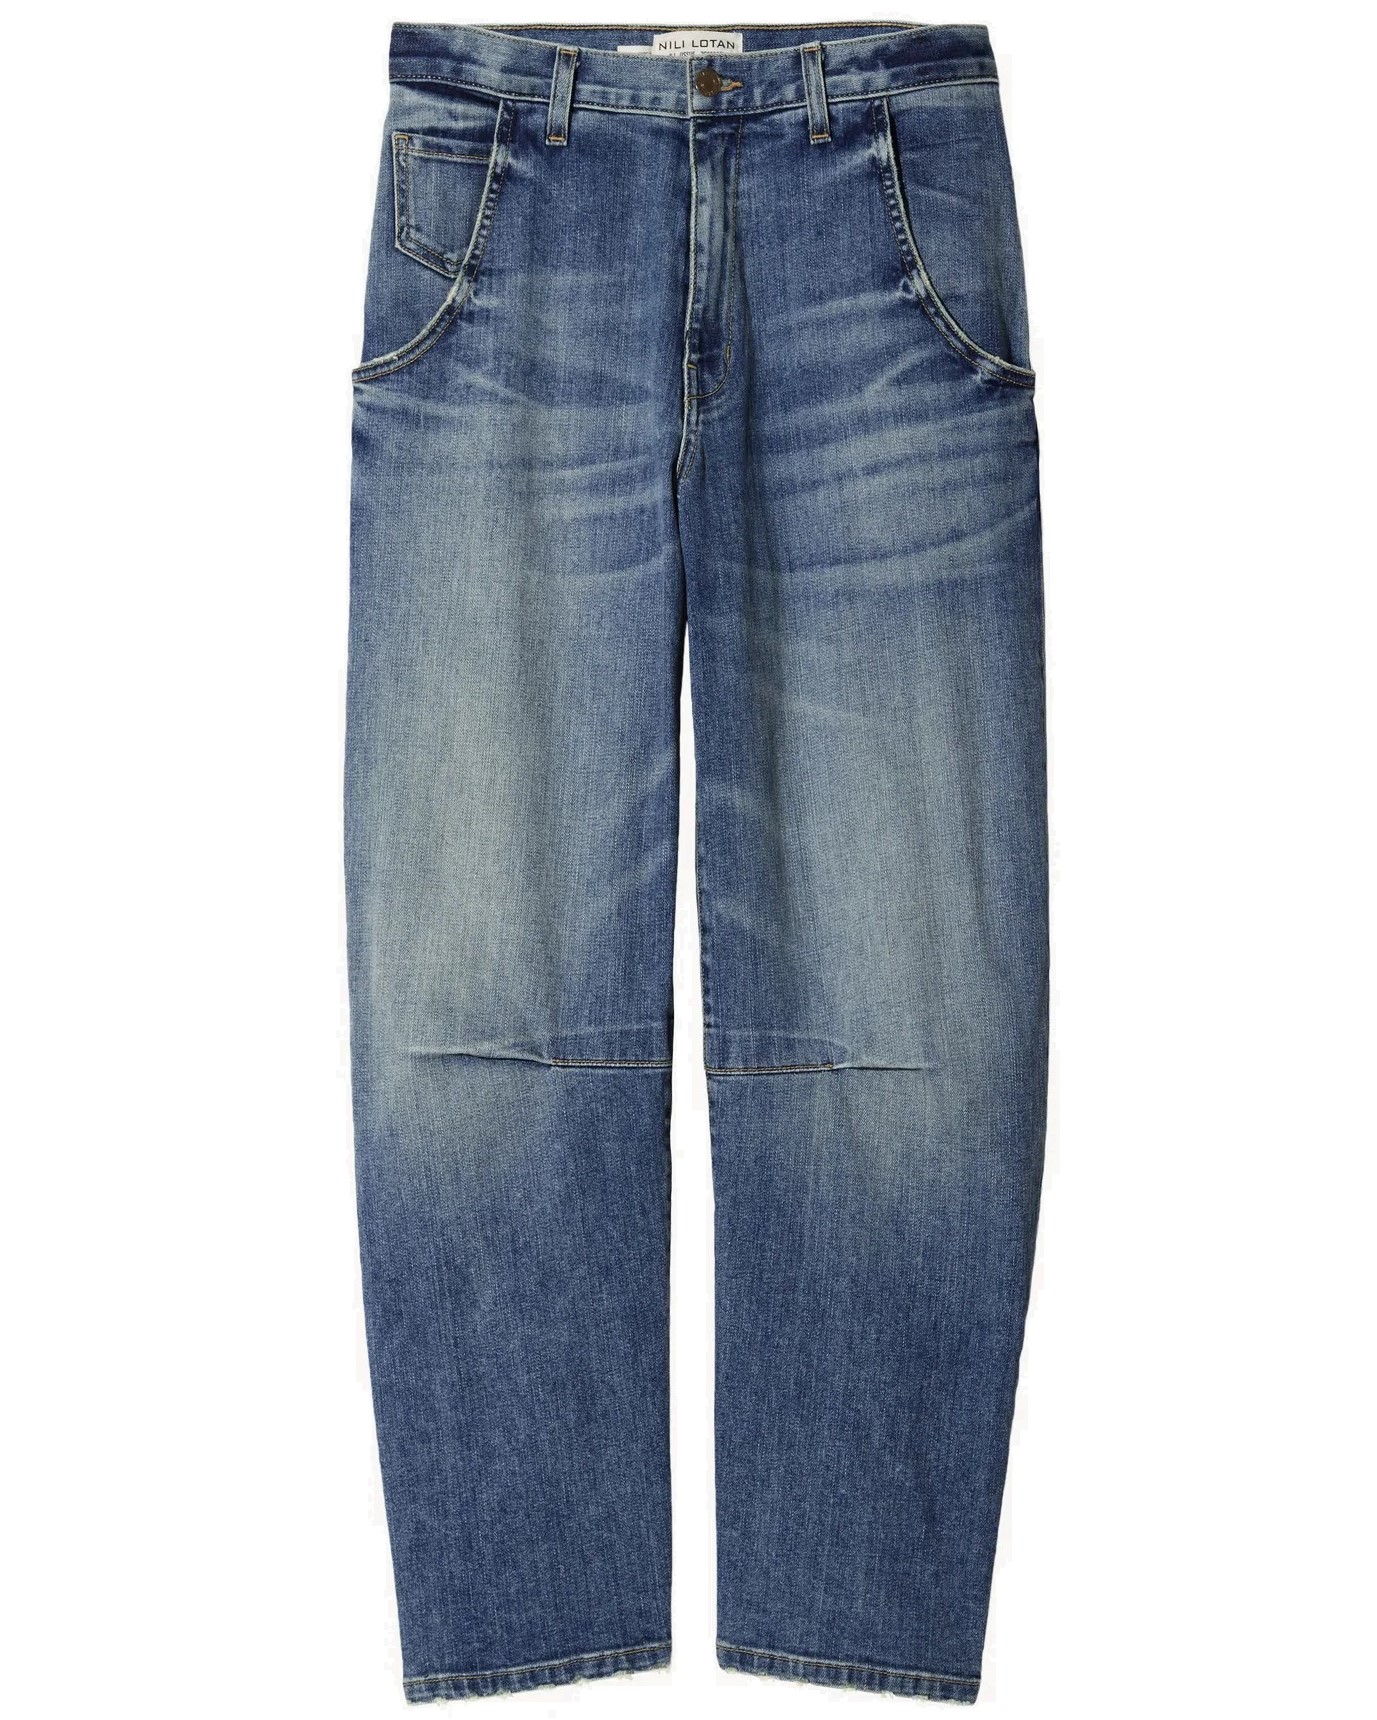 NILI LOTAN Emerson Jeans in Classic Washed